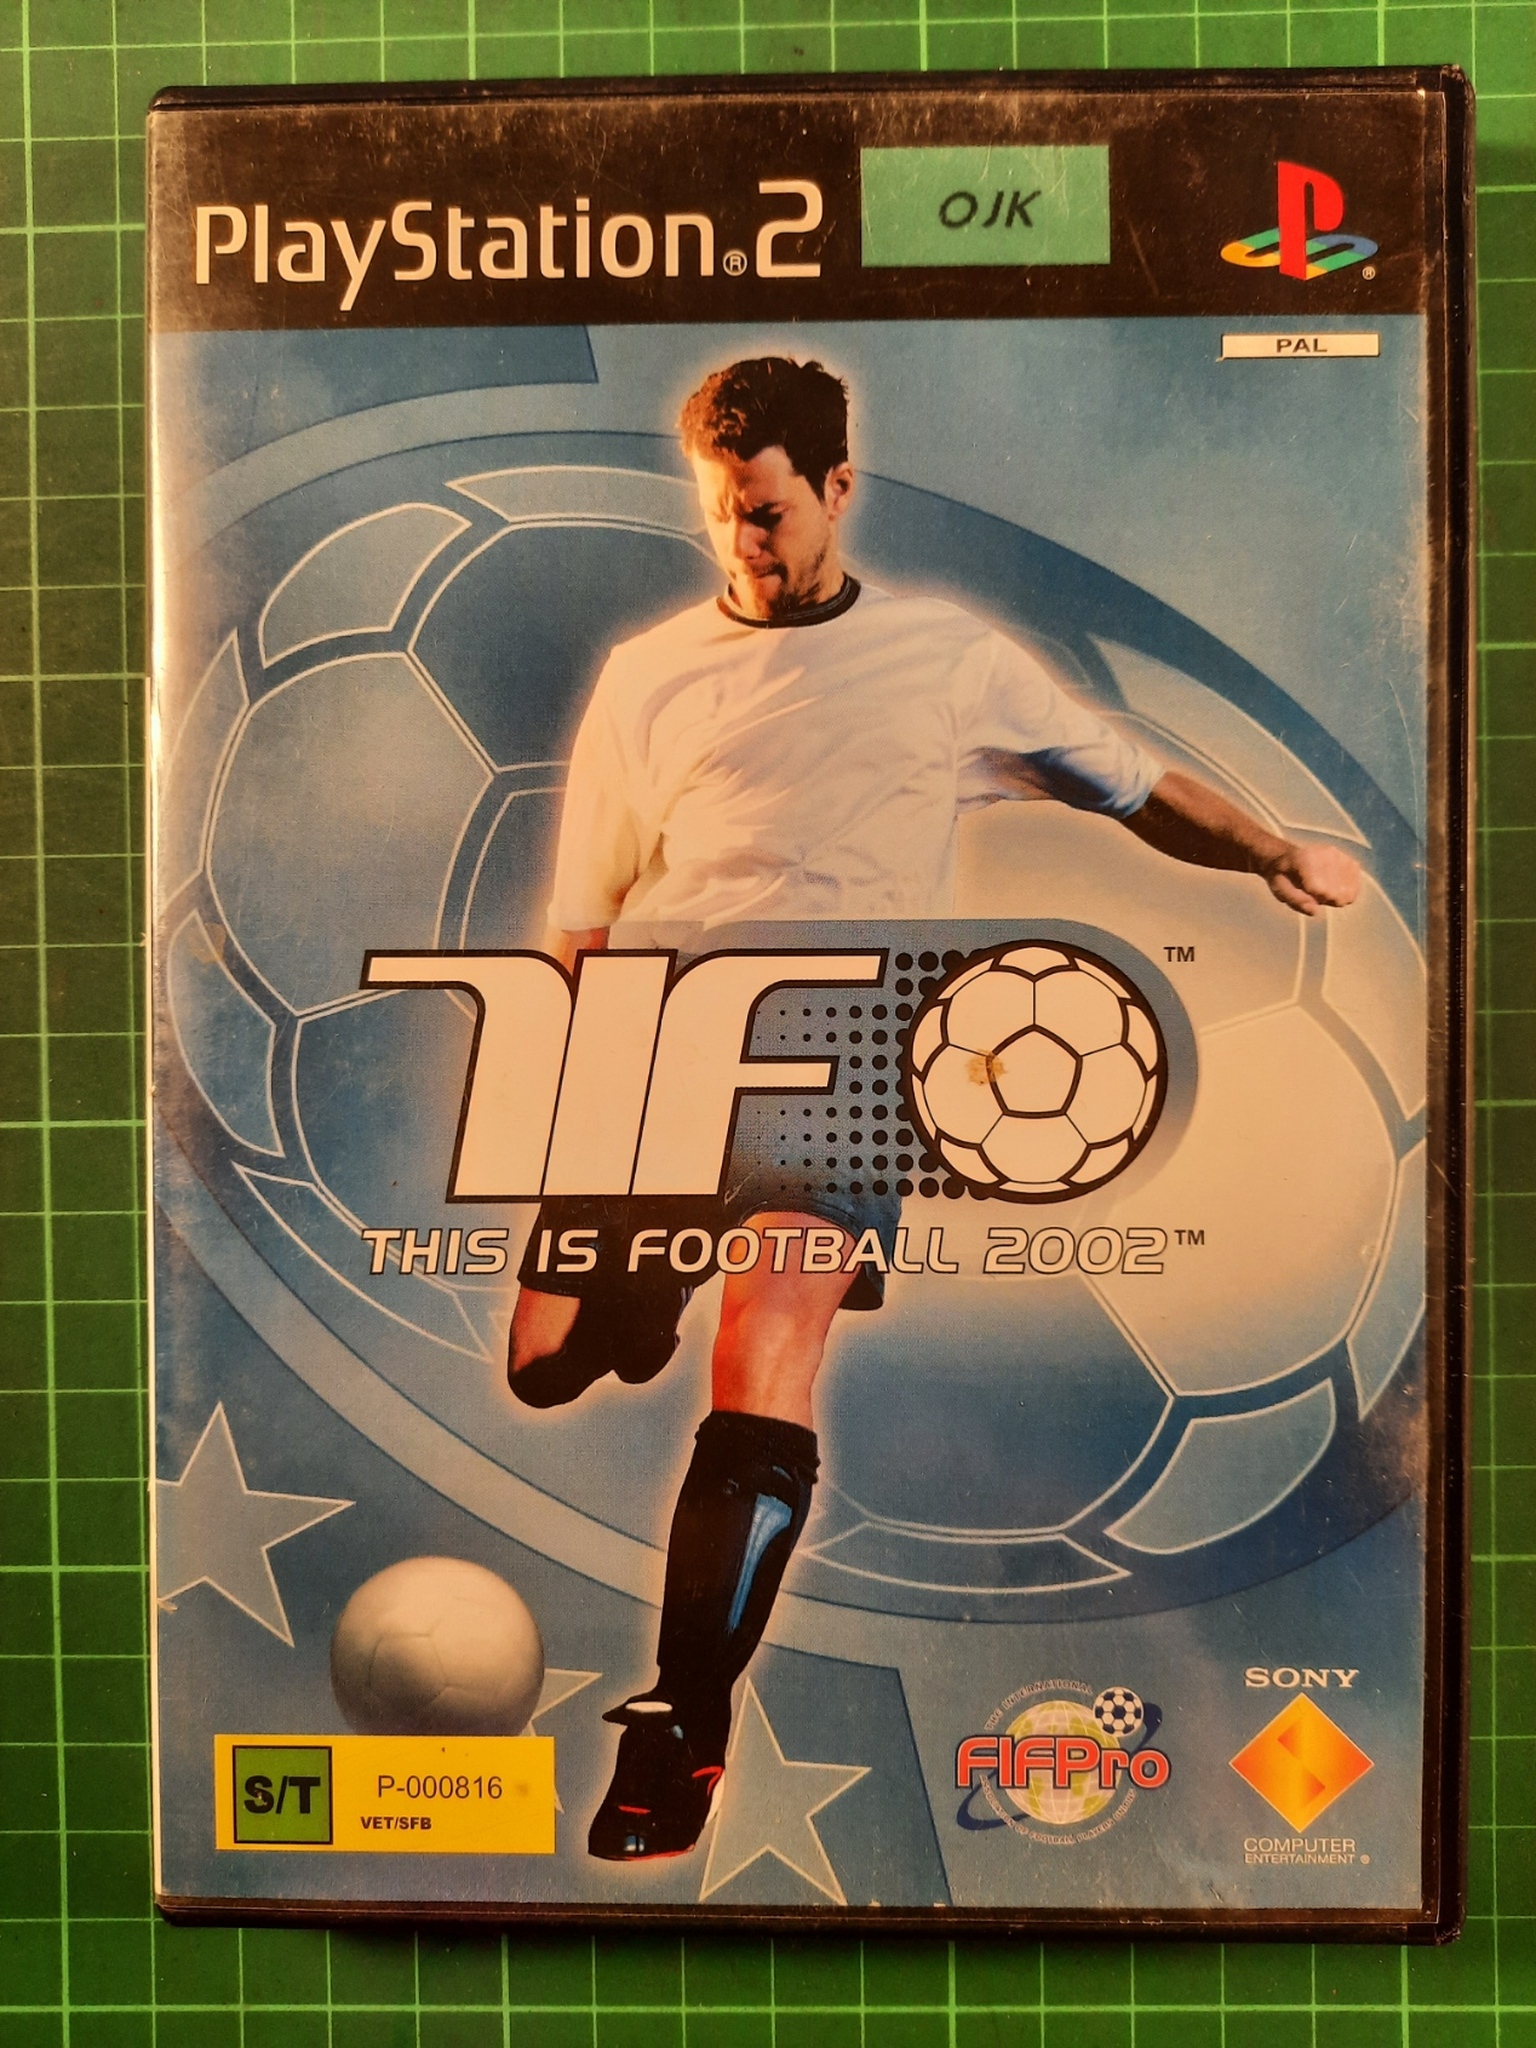 Playstation 2 : This is football 2002